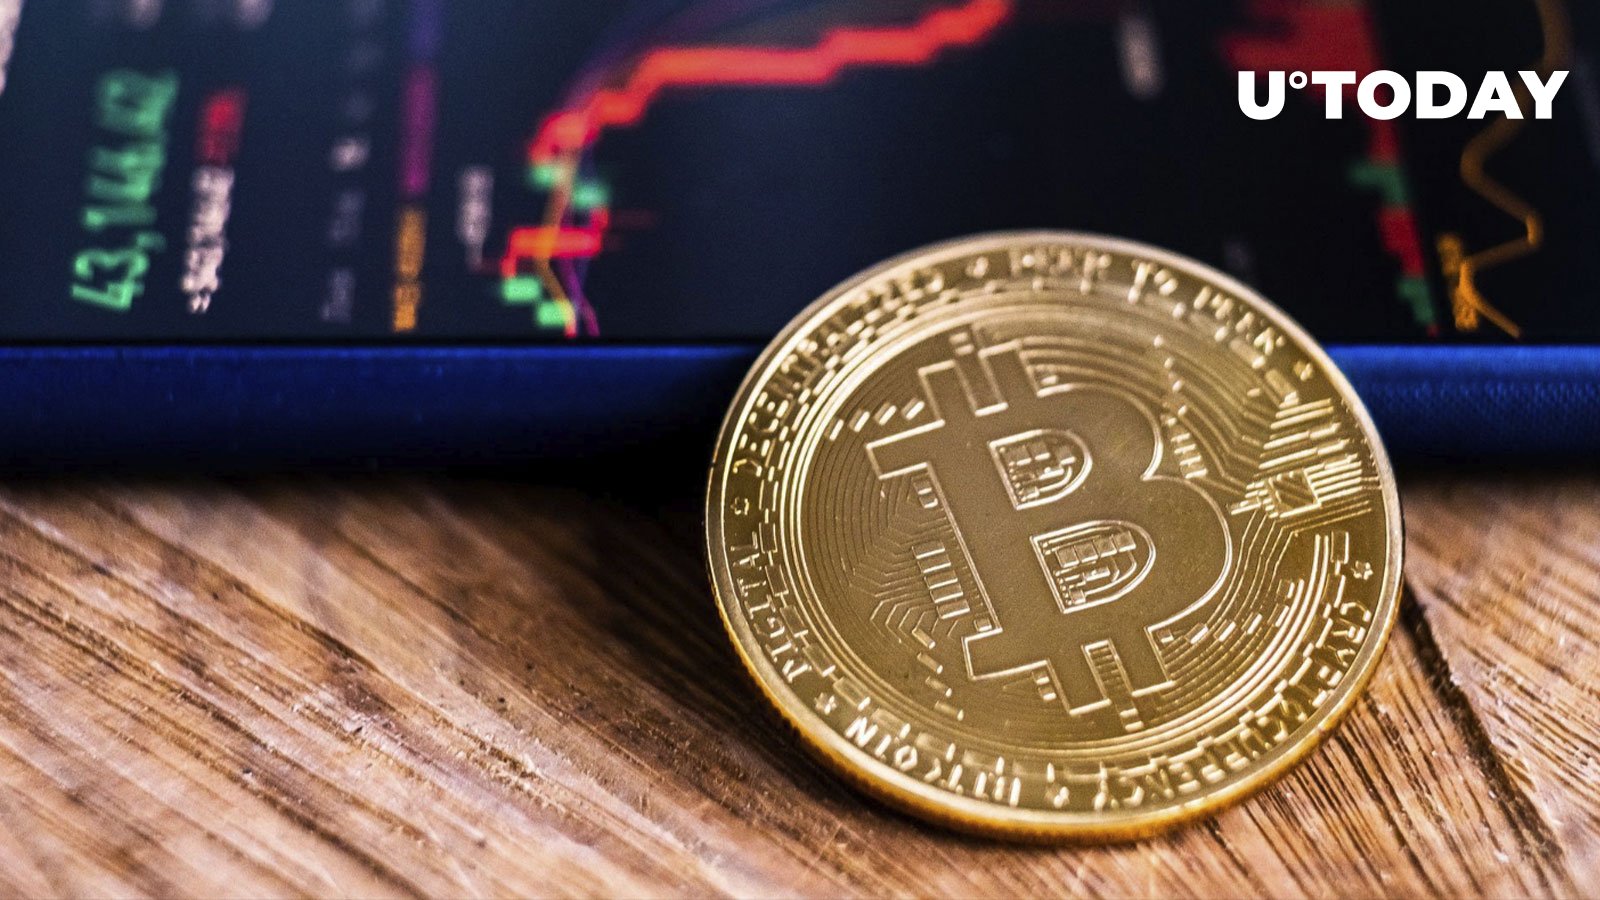 Bitcoin (BTC) to Test $80K Before Upcoming Halving, Says Top Analyst